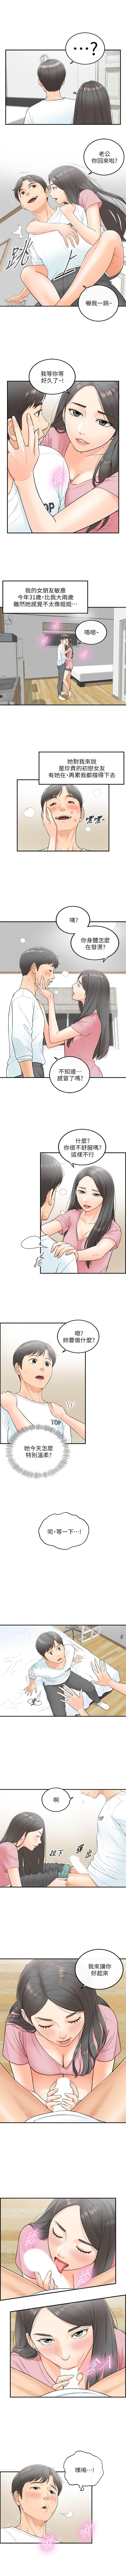 Gayclips 正妹小主管 1-54 官方中文（連載中） Smooth - Page 5